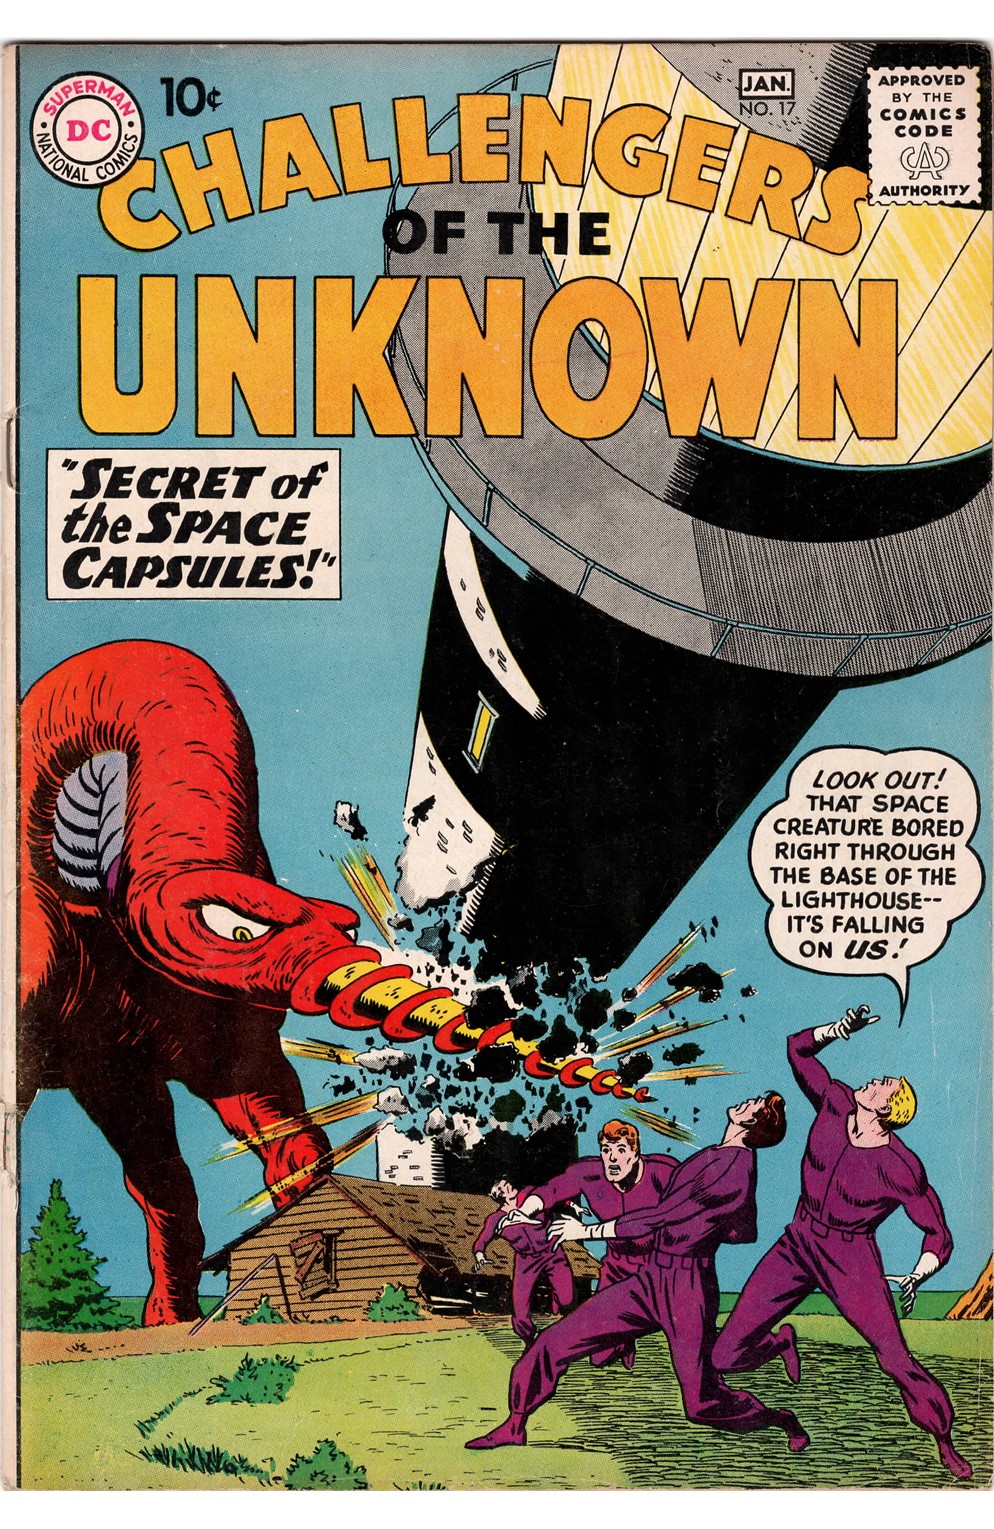 Challengers of The Unknown #17